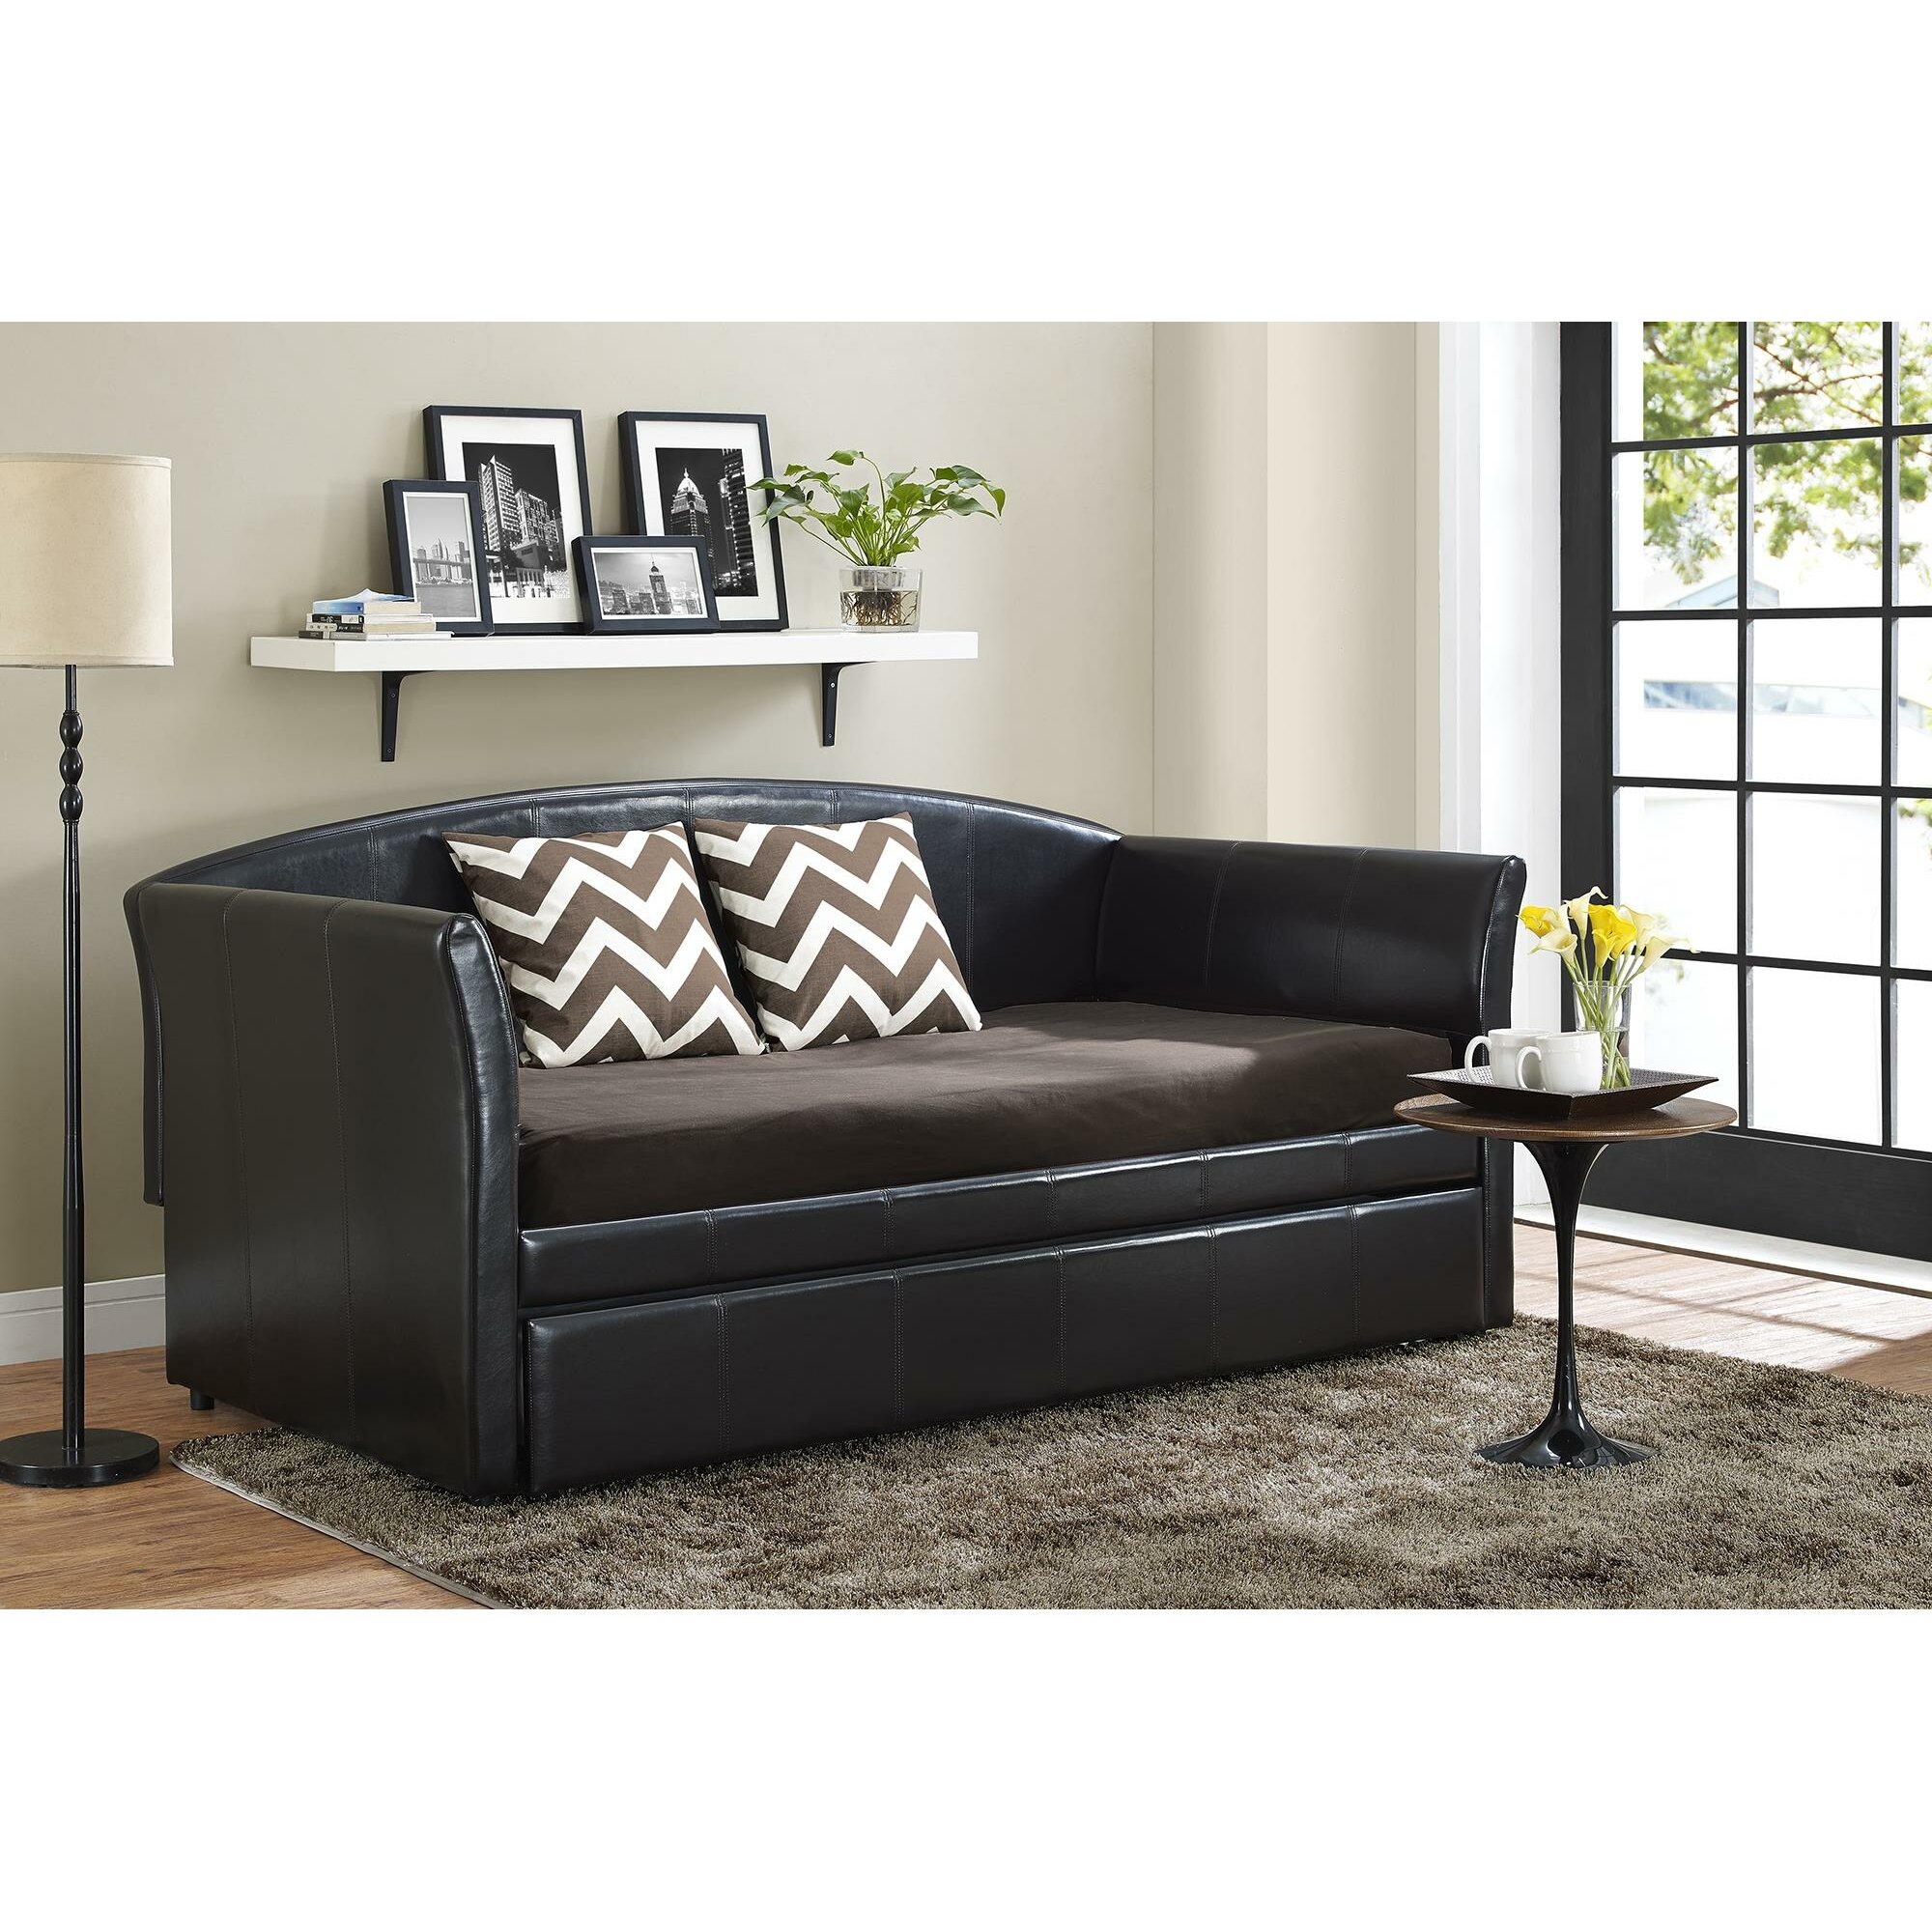 Halle Daybed with Trundle